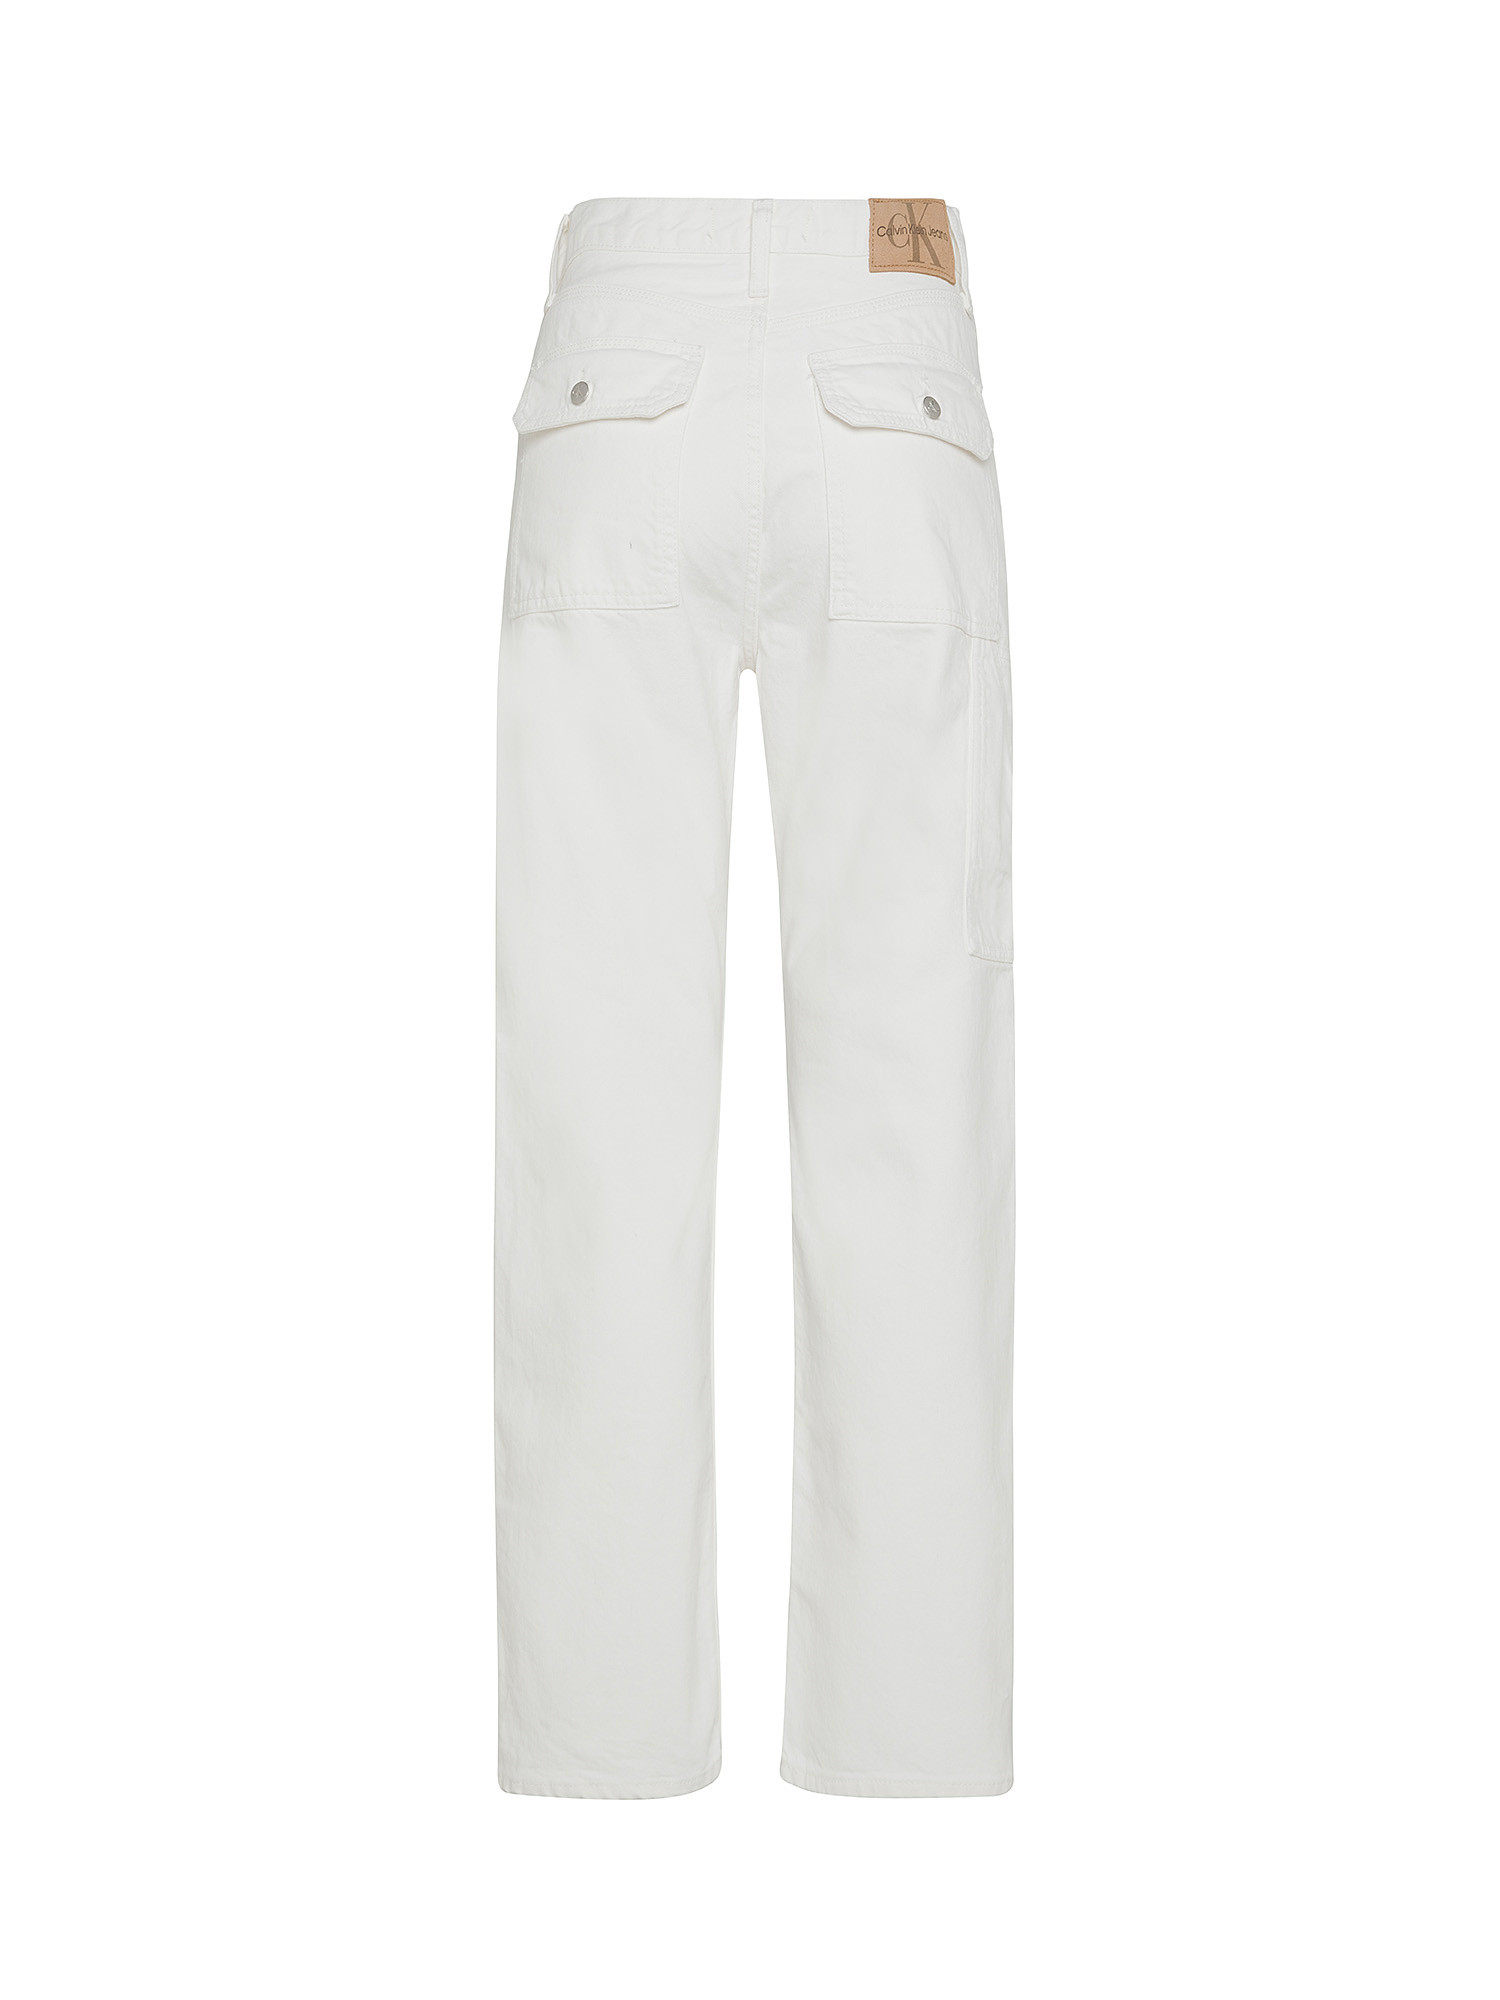 Calvin Klein Jeans - Jeans dritti in cotone, Bianco, large image number 1